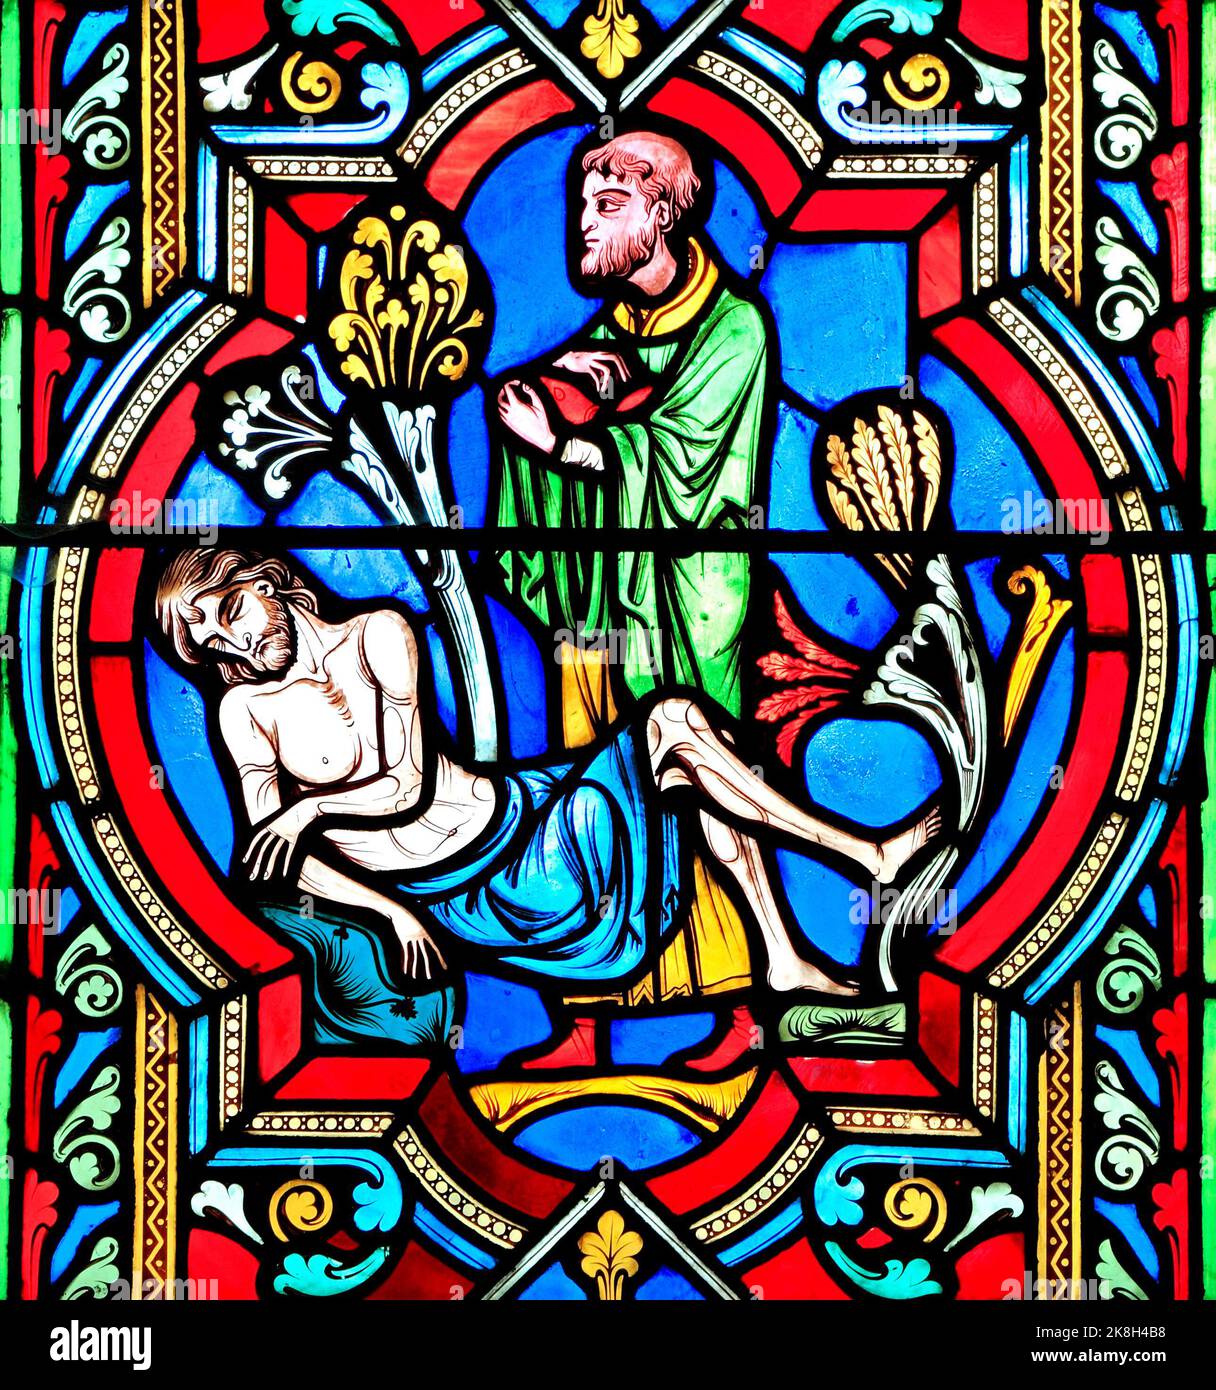 The Good Samaritan Parable, a Priest 'passes by on the other side', ignoring dying traveller, stained glass window, by Oudinot of Paris,1859, Feltwell Stock Photo